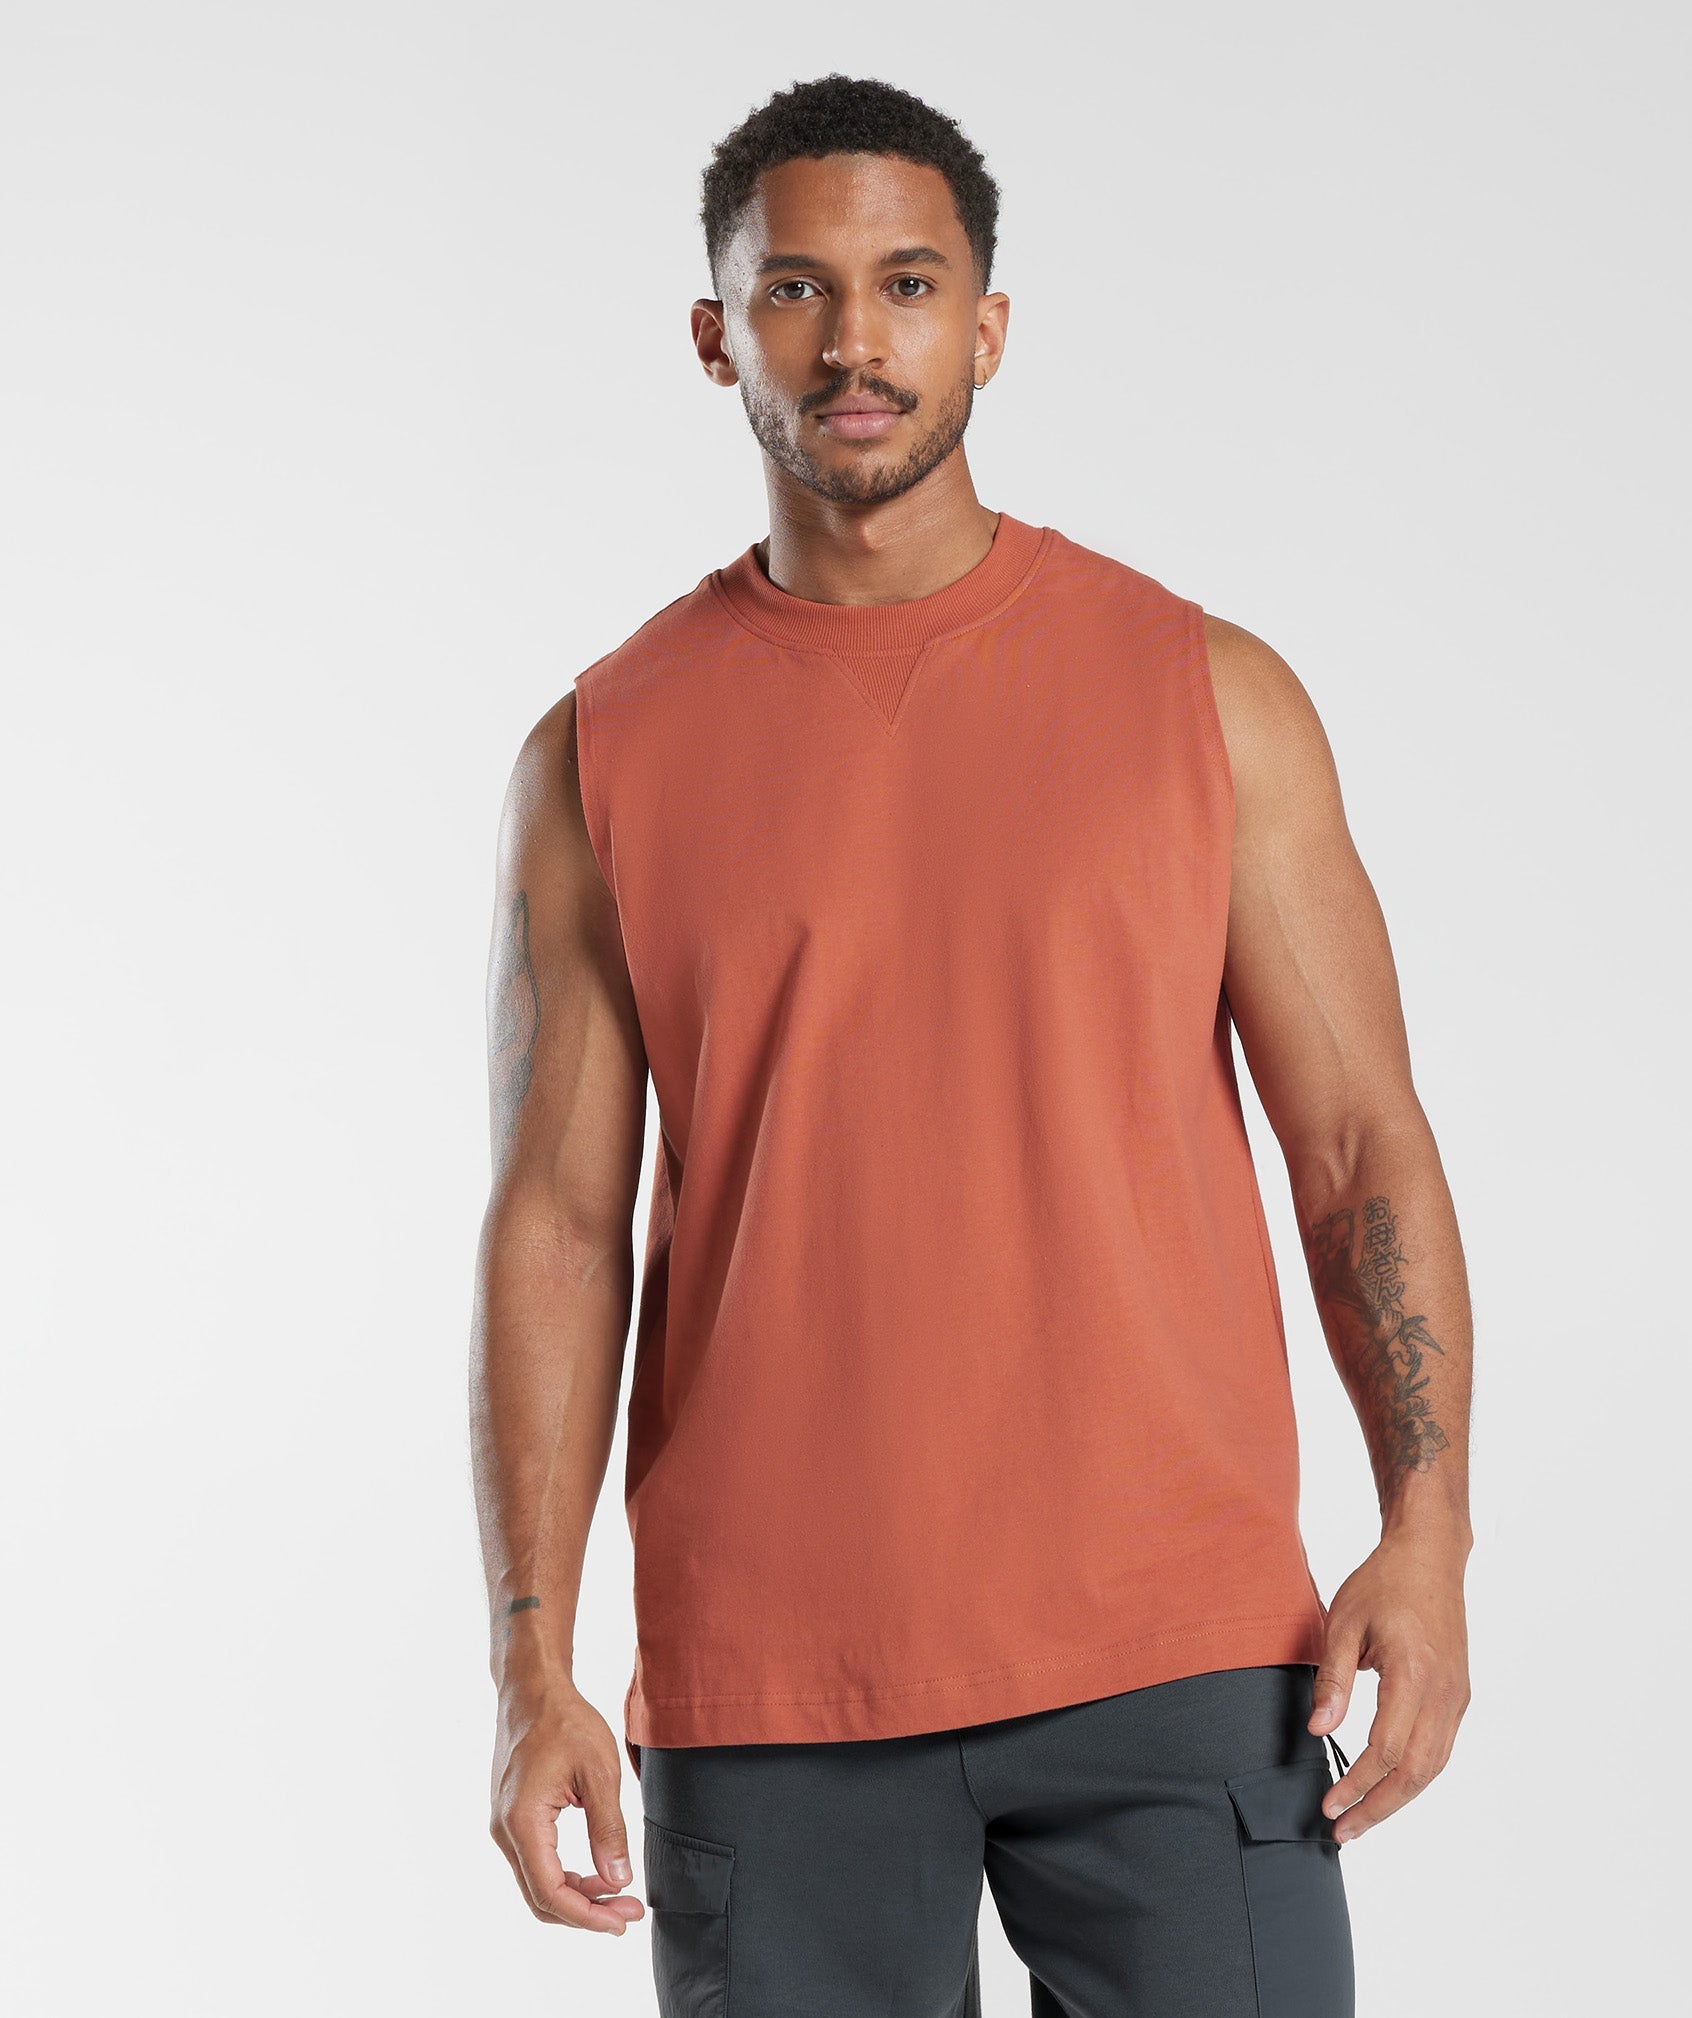 Rest Day Essentials Tank in Persimmon Red - view 1